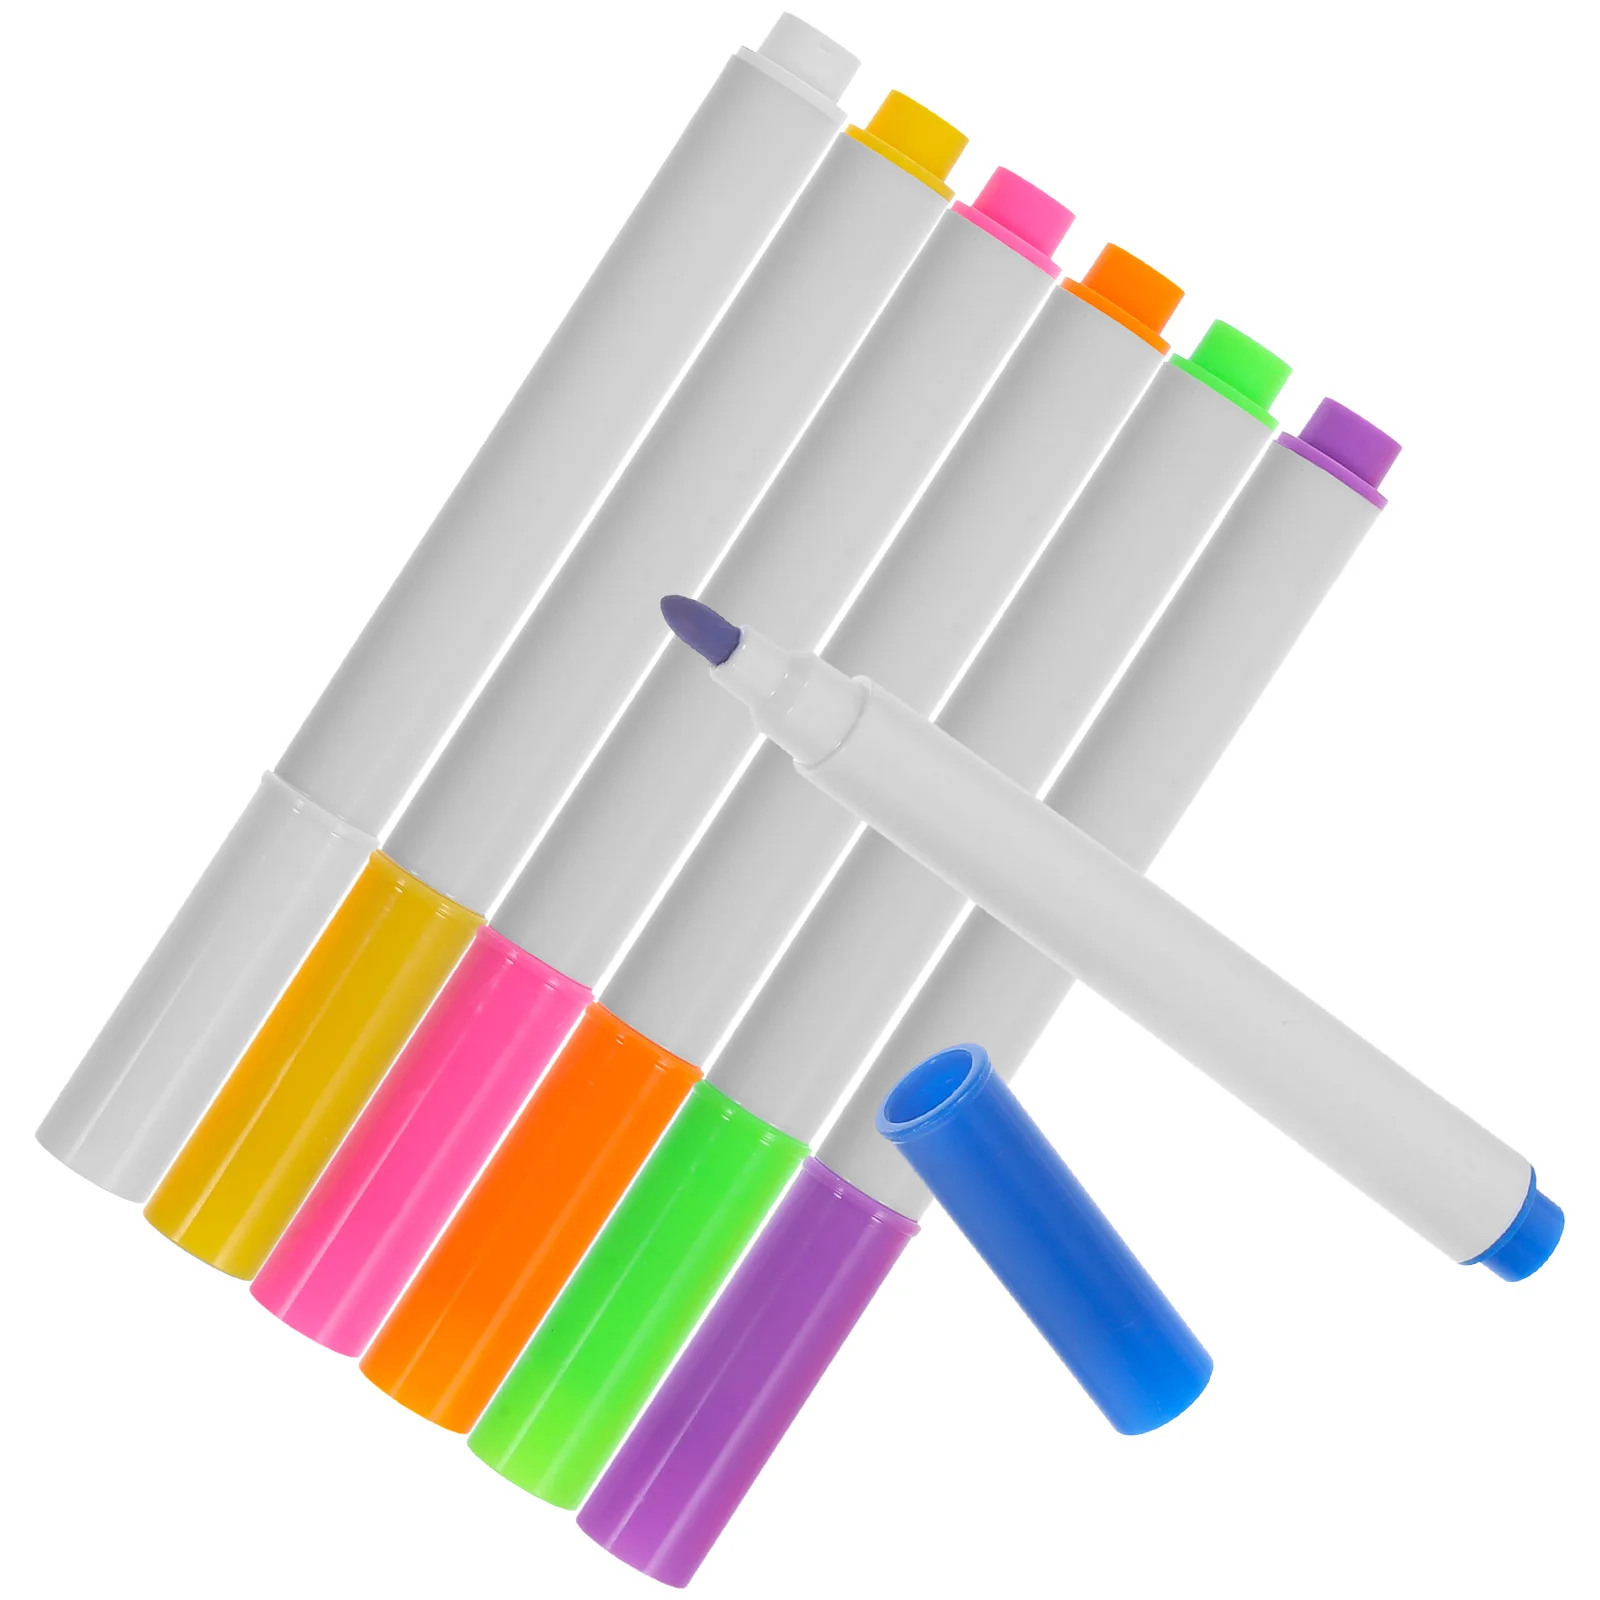 7pcs Dry Erase Markers Painting Pens Colored Markers Magnetic Markers White Board Markers